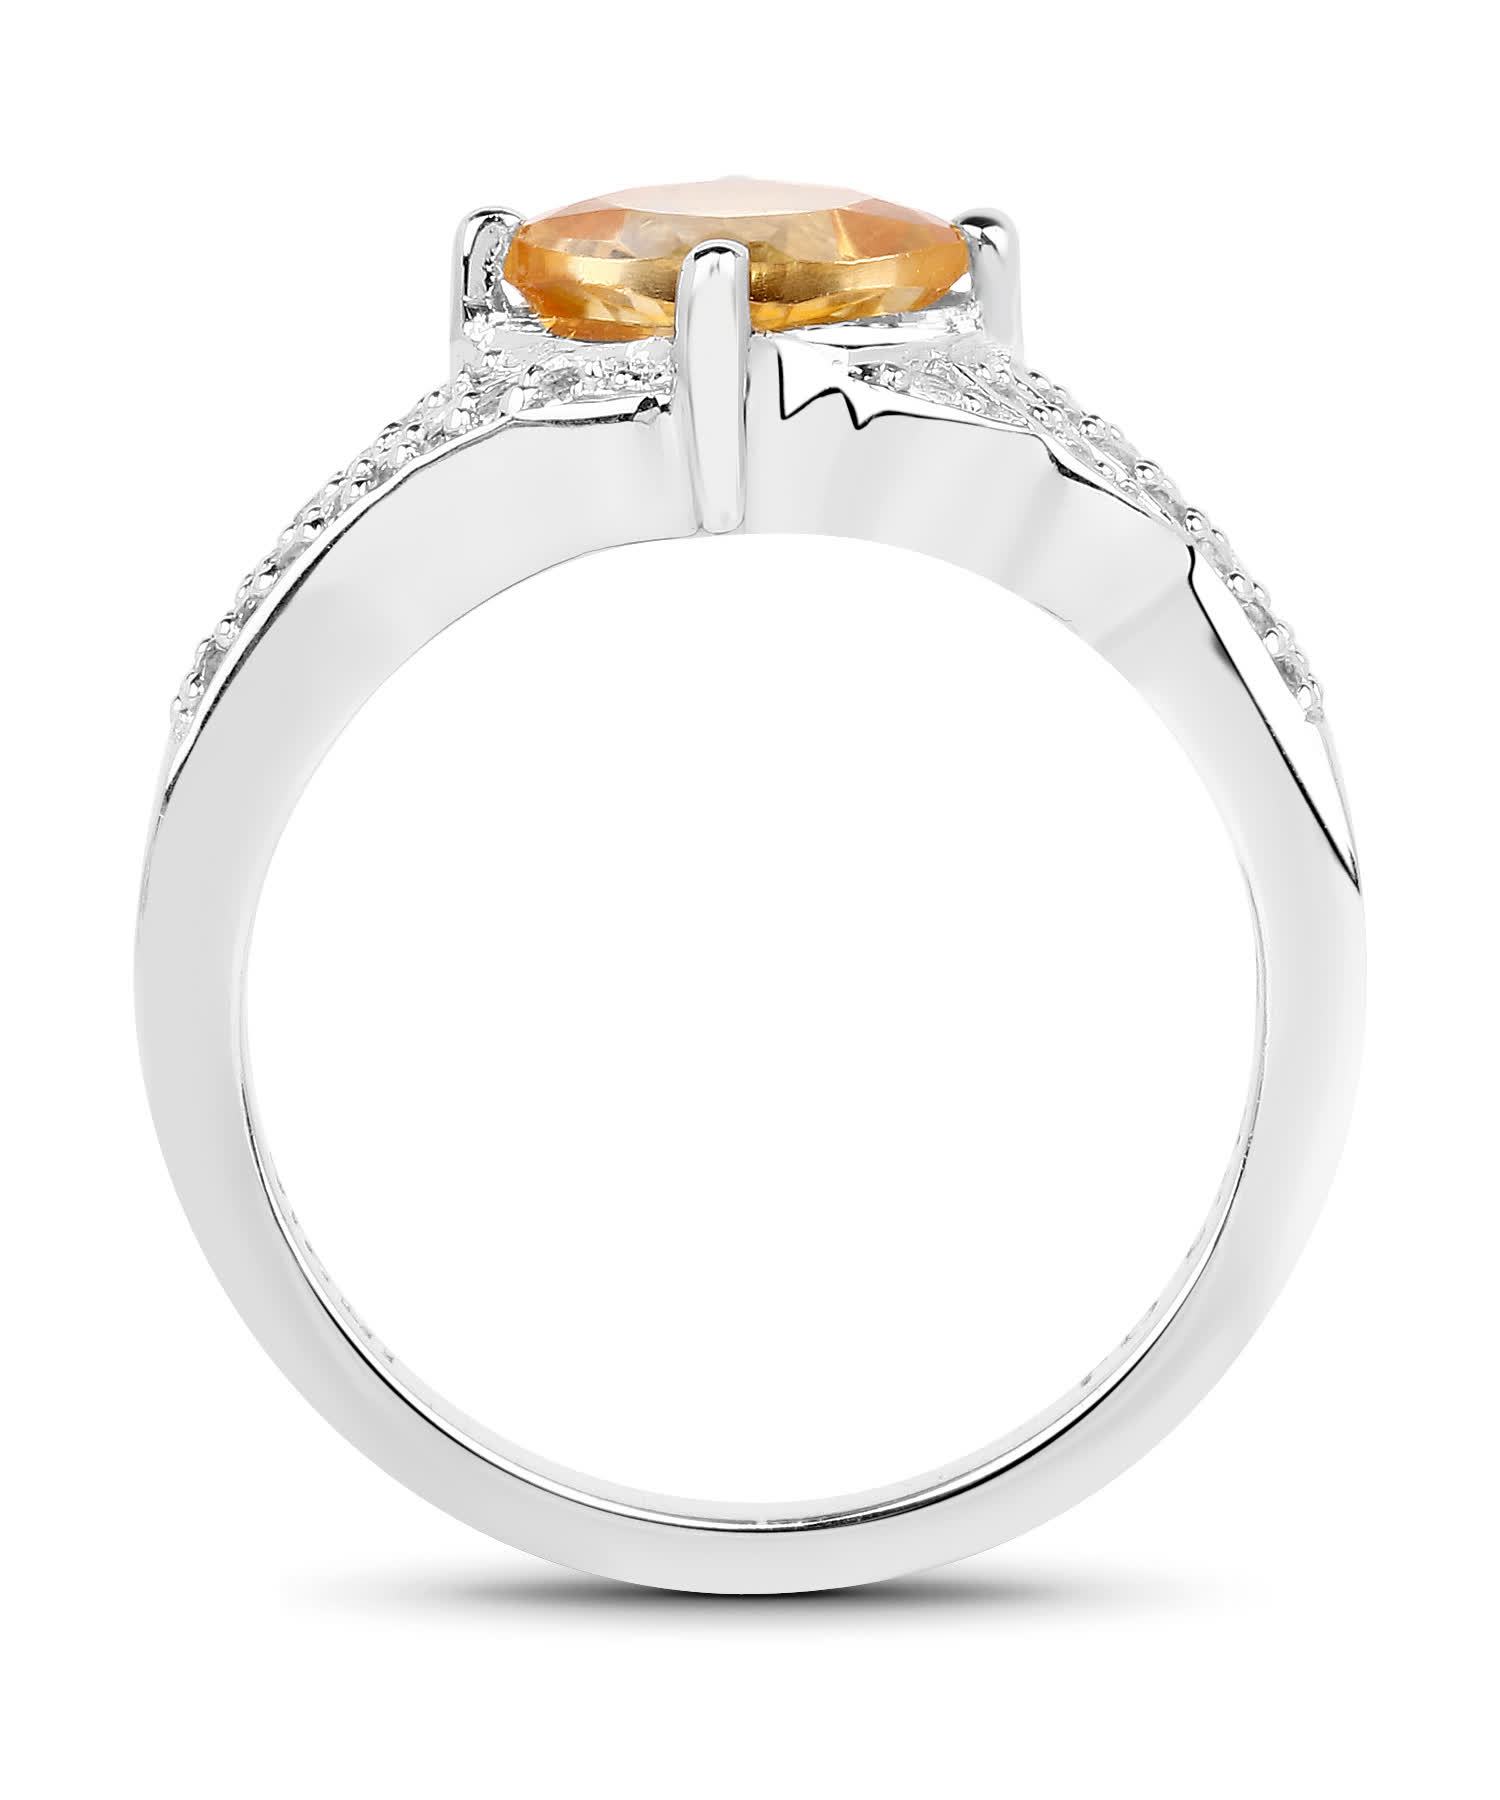 1.73ctw Natural Citrine and Topaz Rhodium Plated 925 Sterling Silver Ring View 2